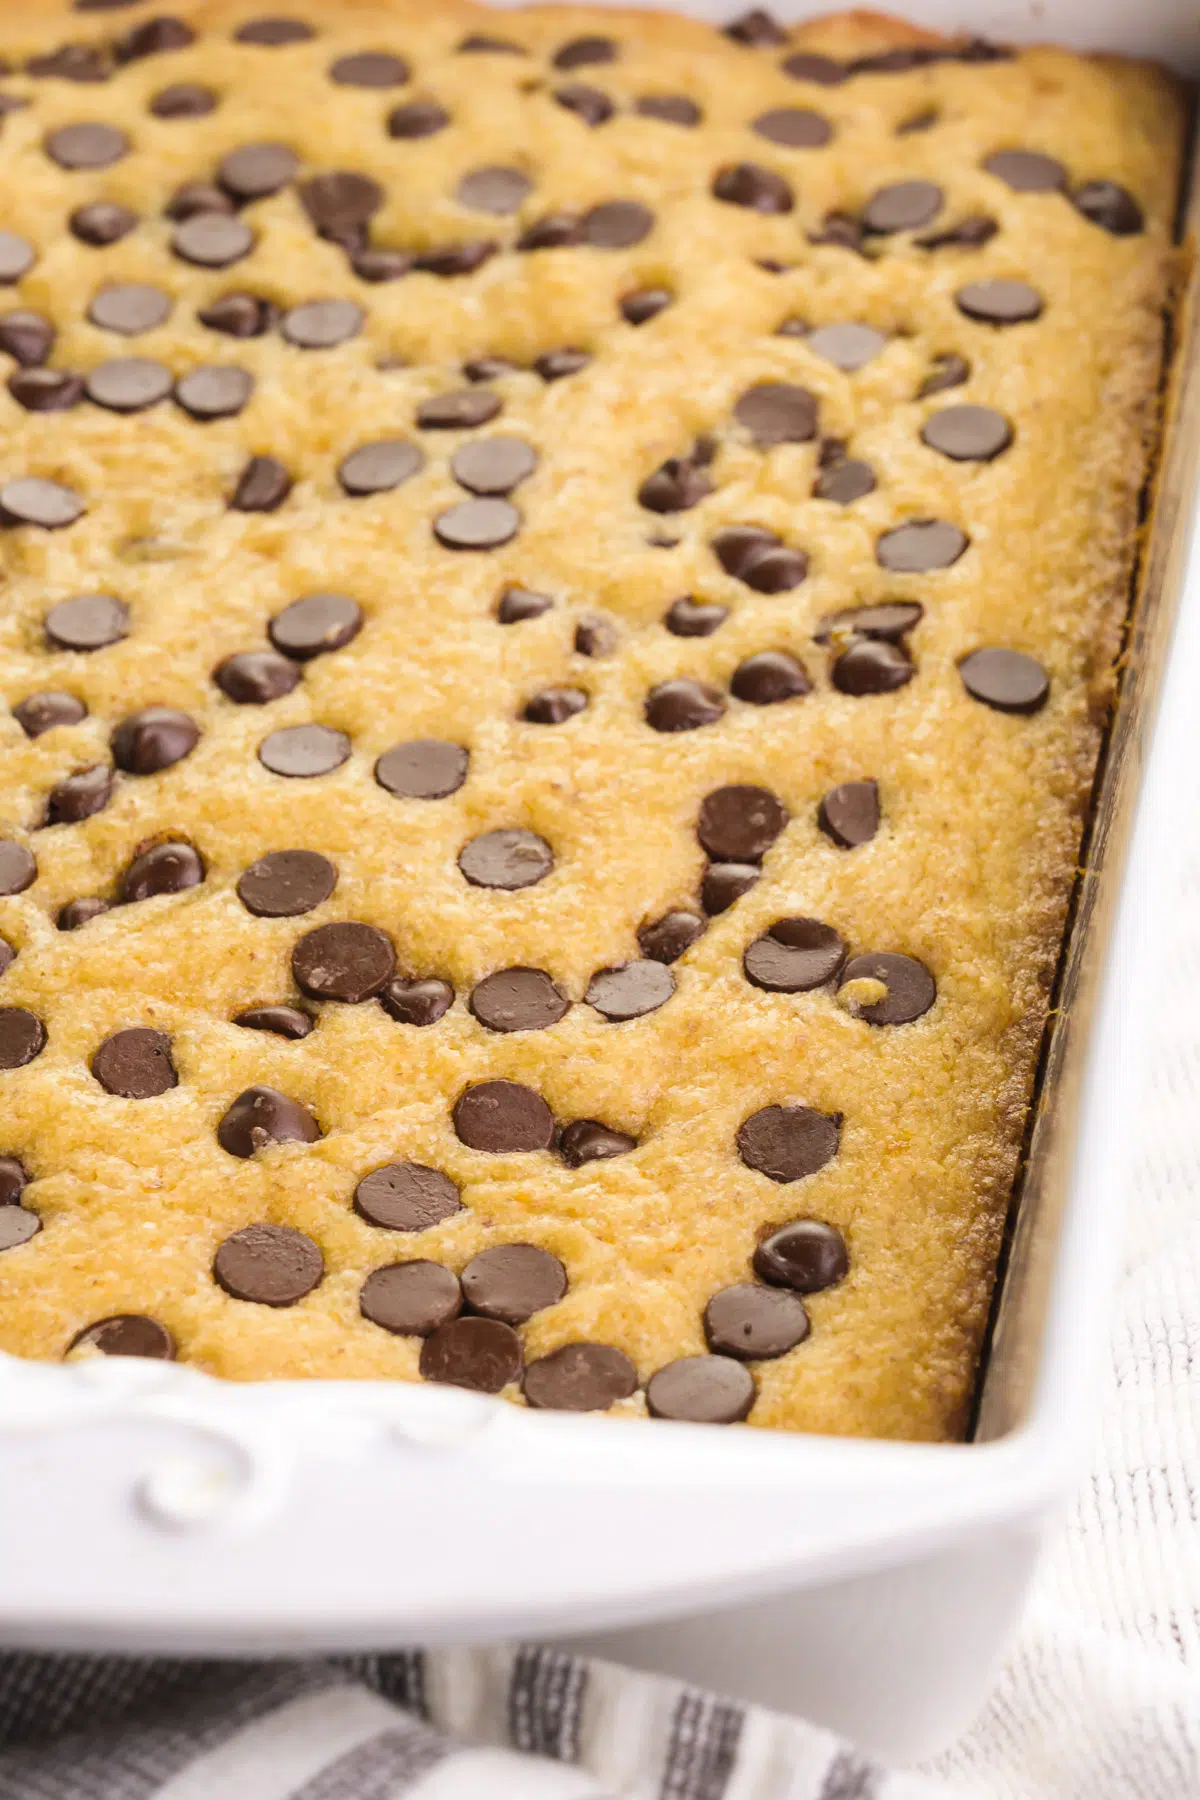 Looking across a pan of blondies with chocolate chips on top.